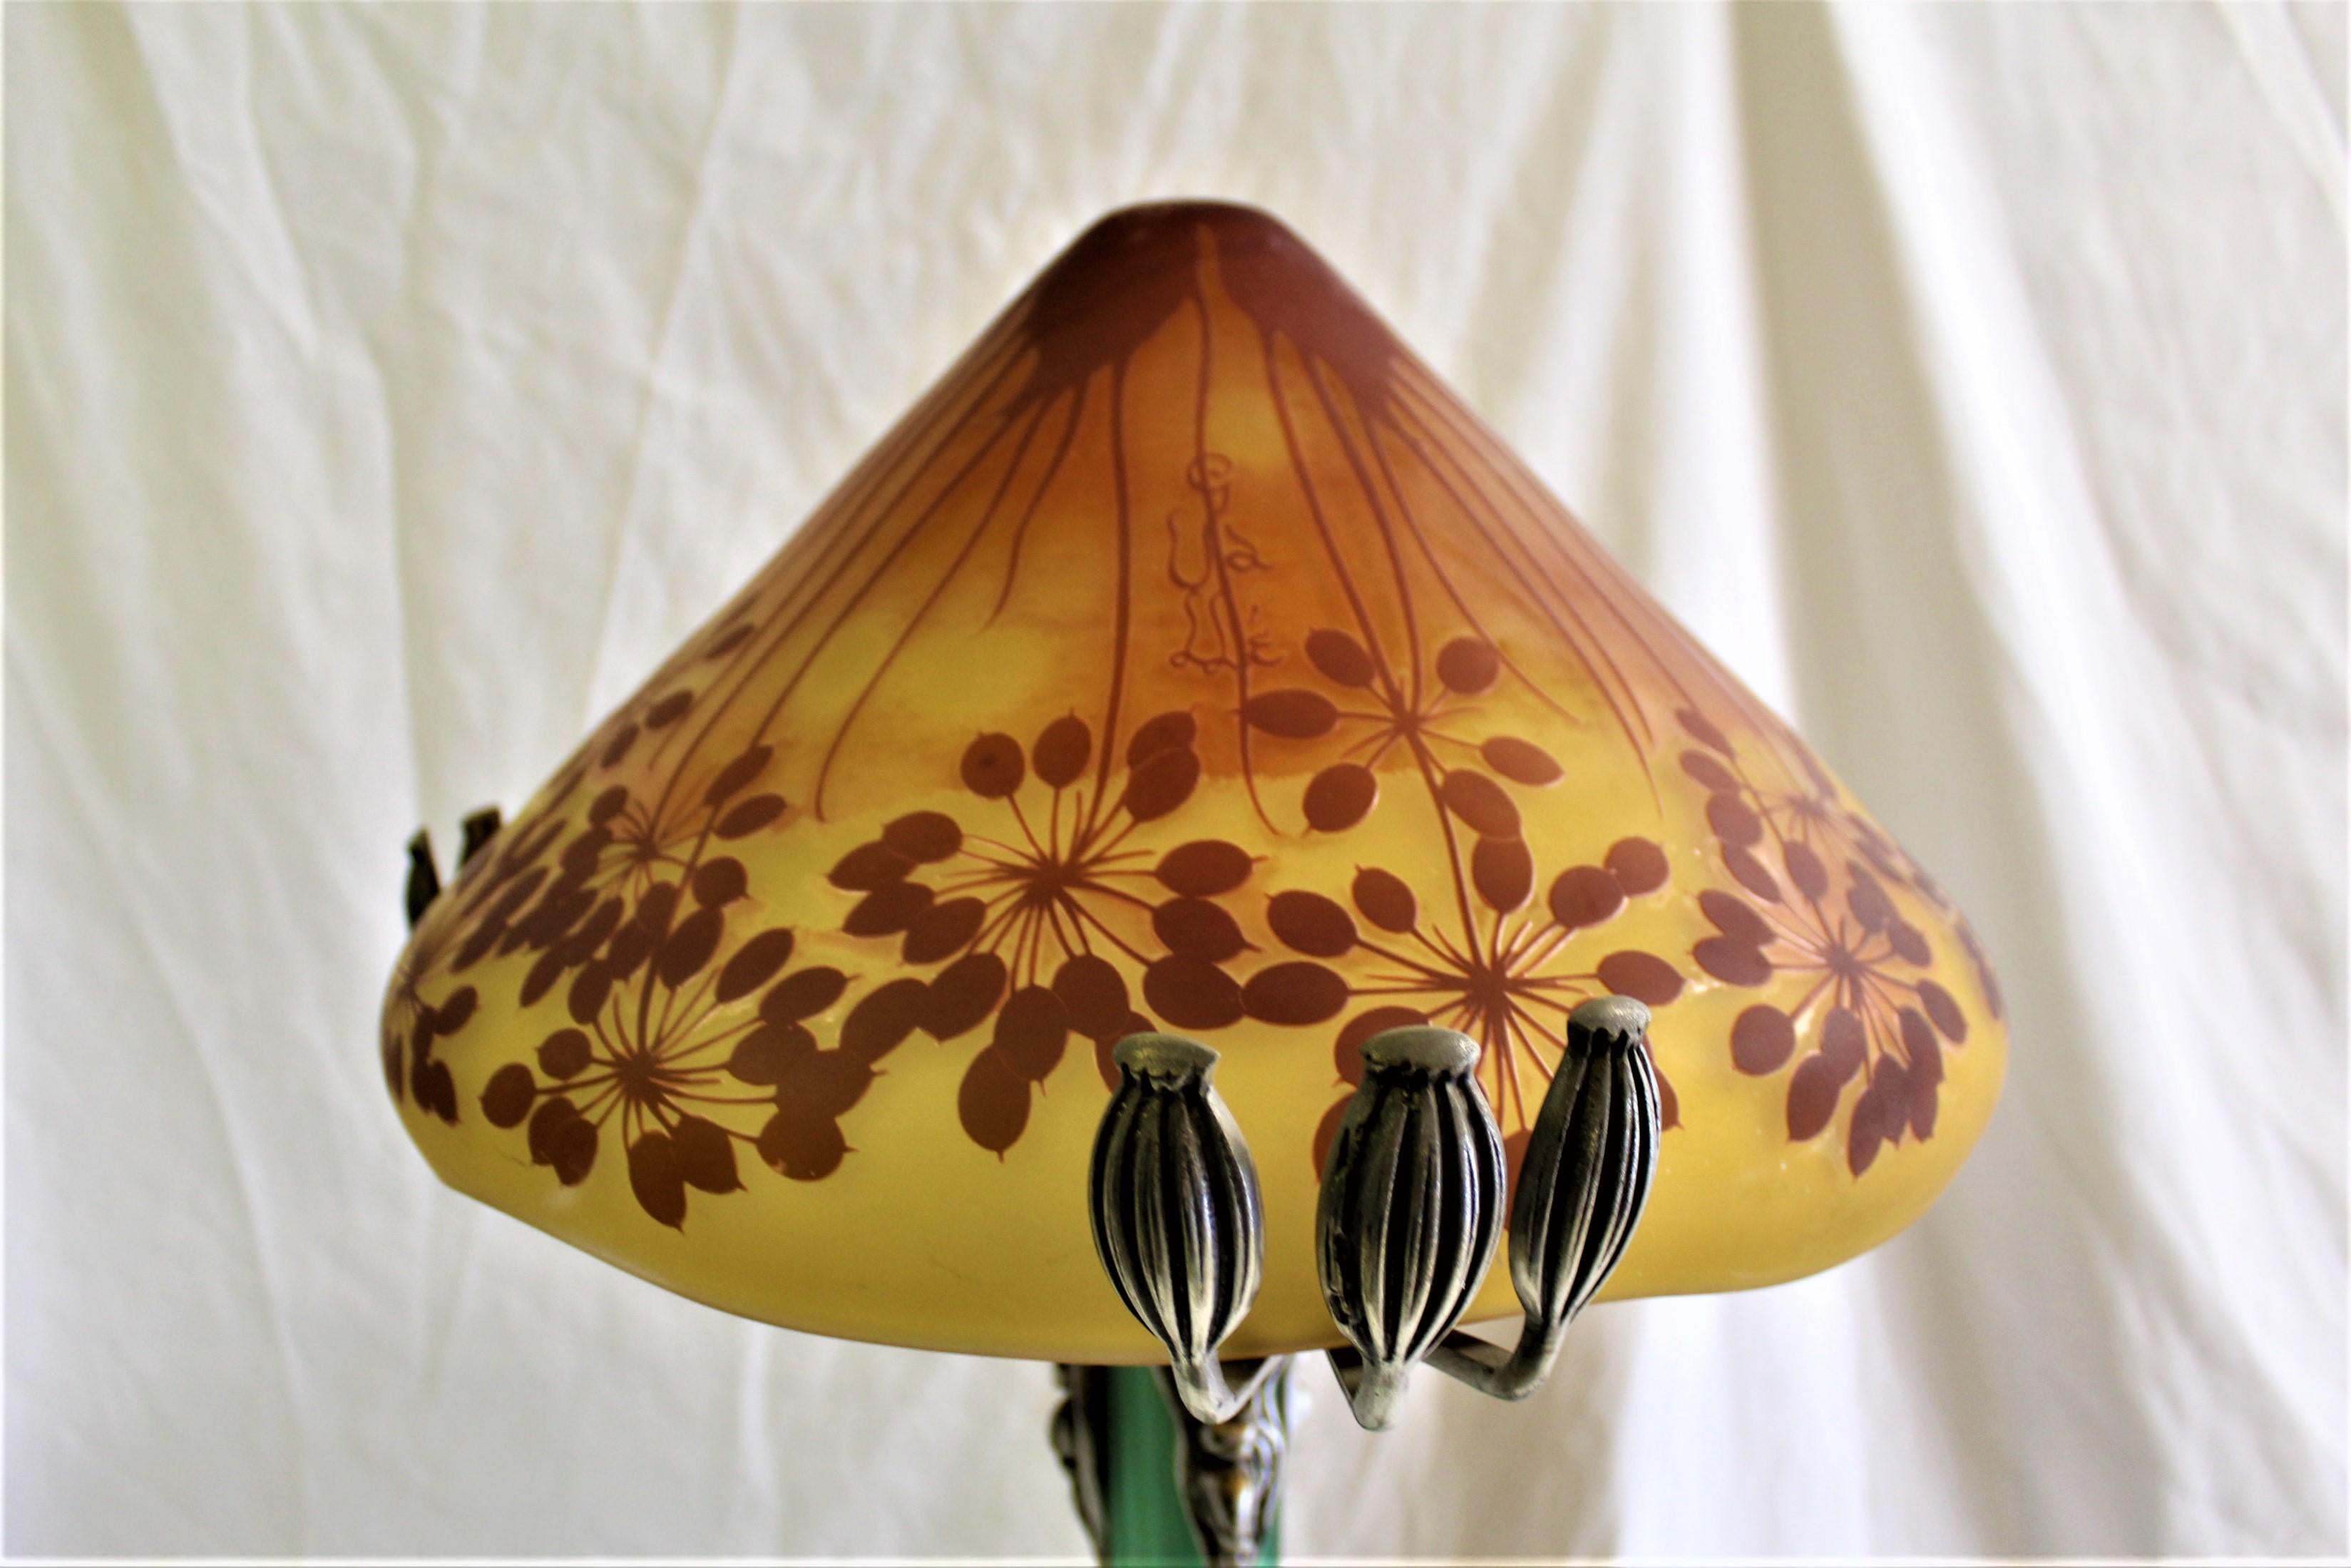 A large glass and bronze lamp in the shape of a Mushroom. Contemporary design from Europe. No longer available and rare to find now. This has to be special white glove packing and shipping. It is at 35